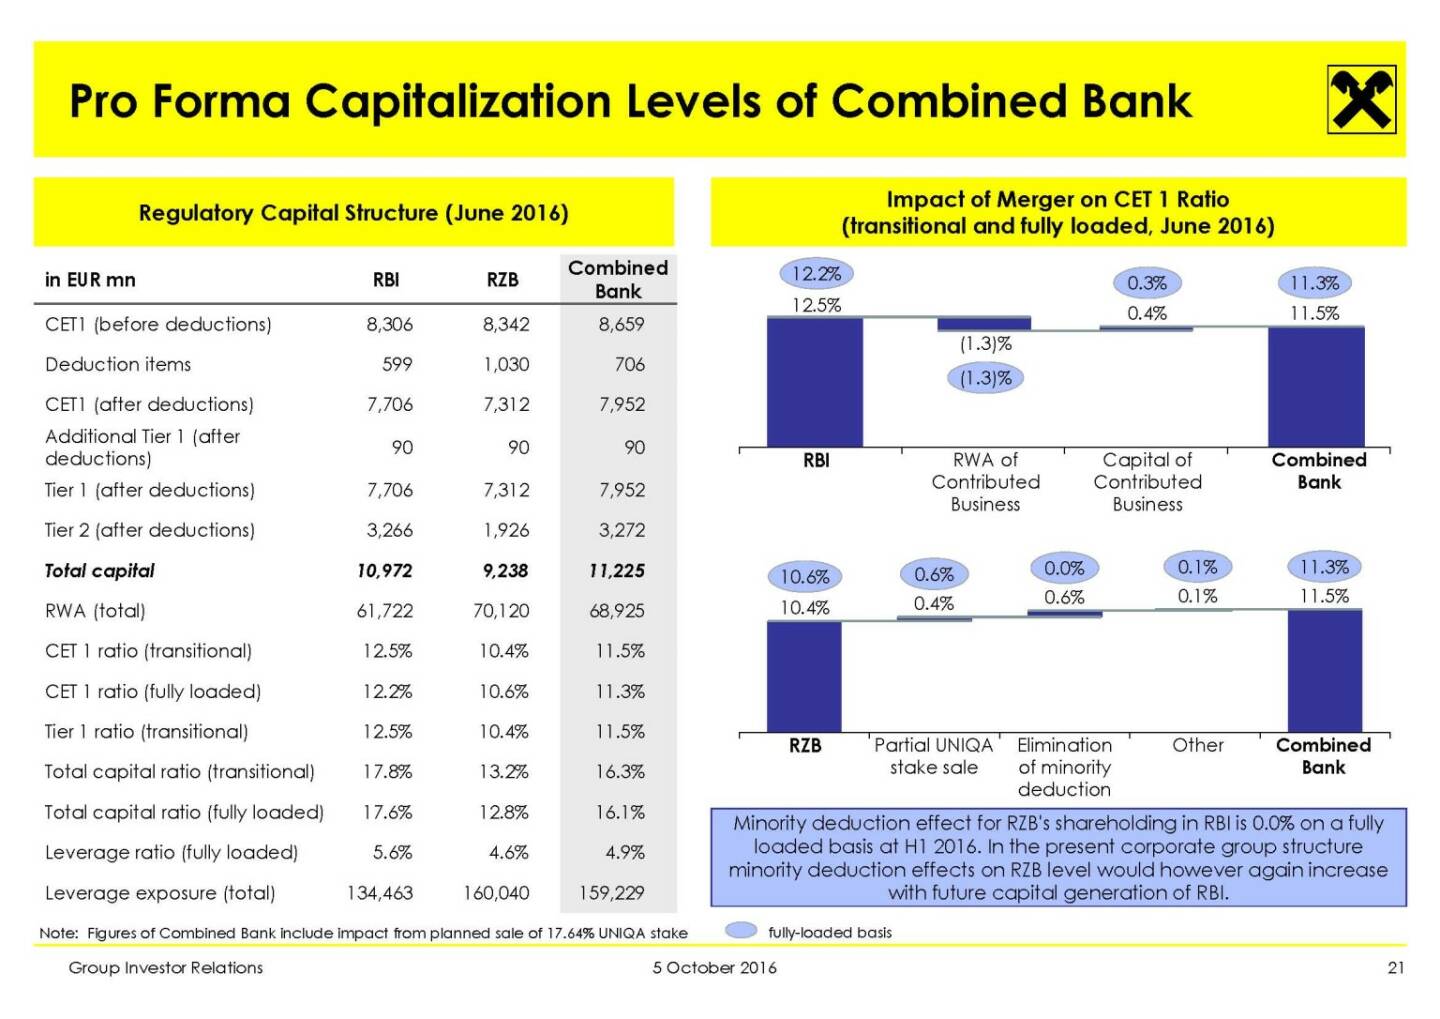 RBI - Pro Forma Capitalization Levels of Combined Bank